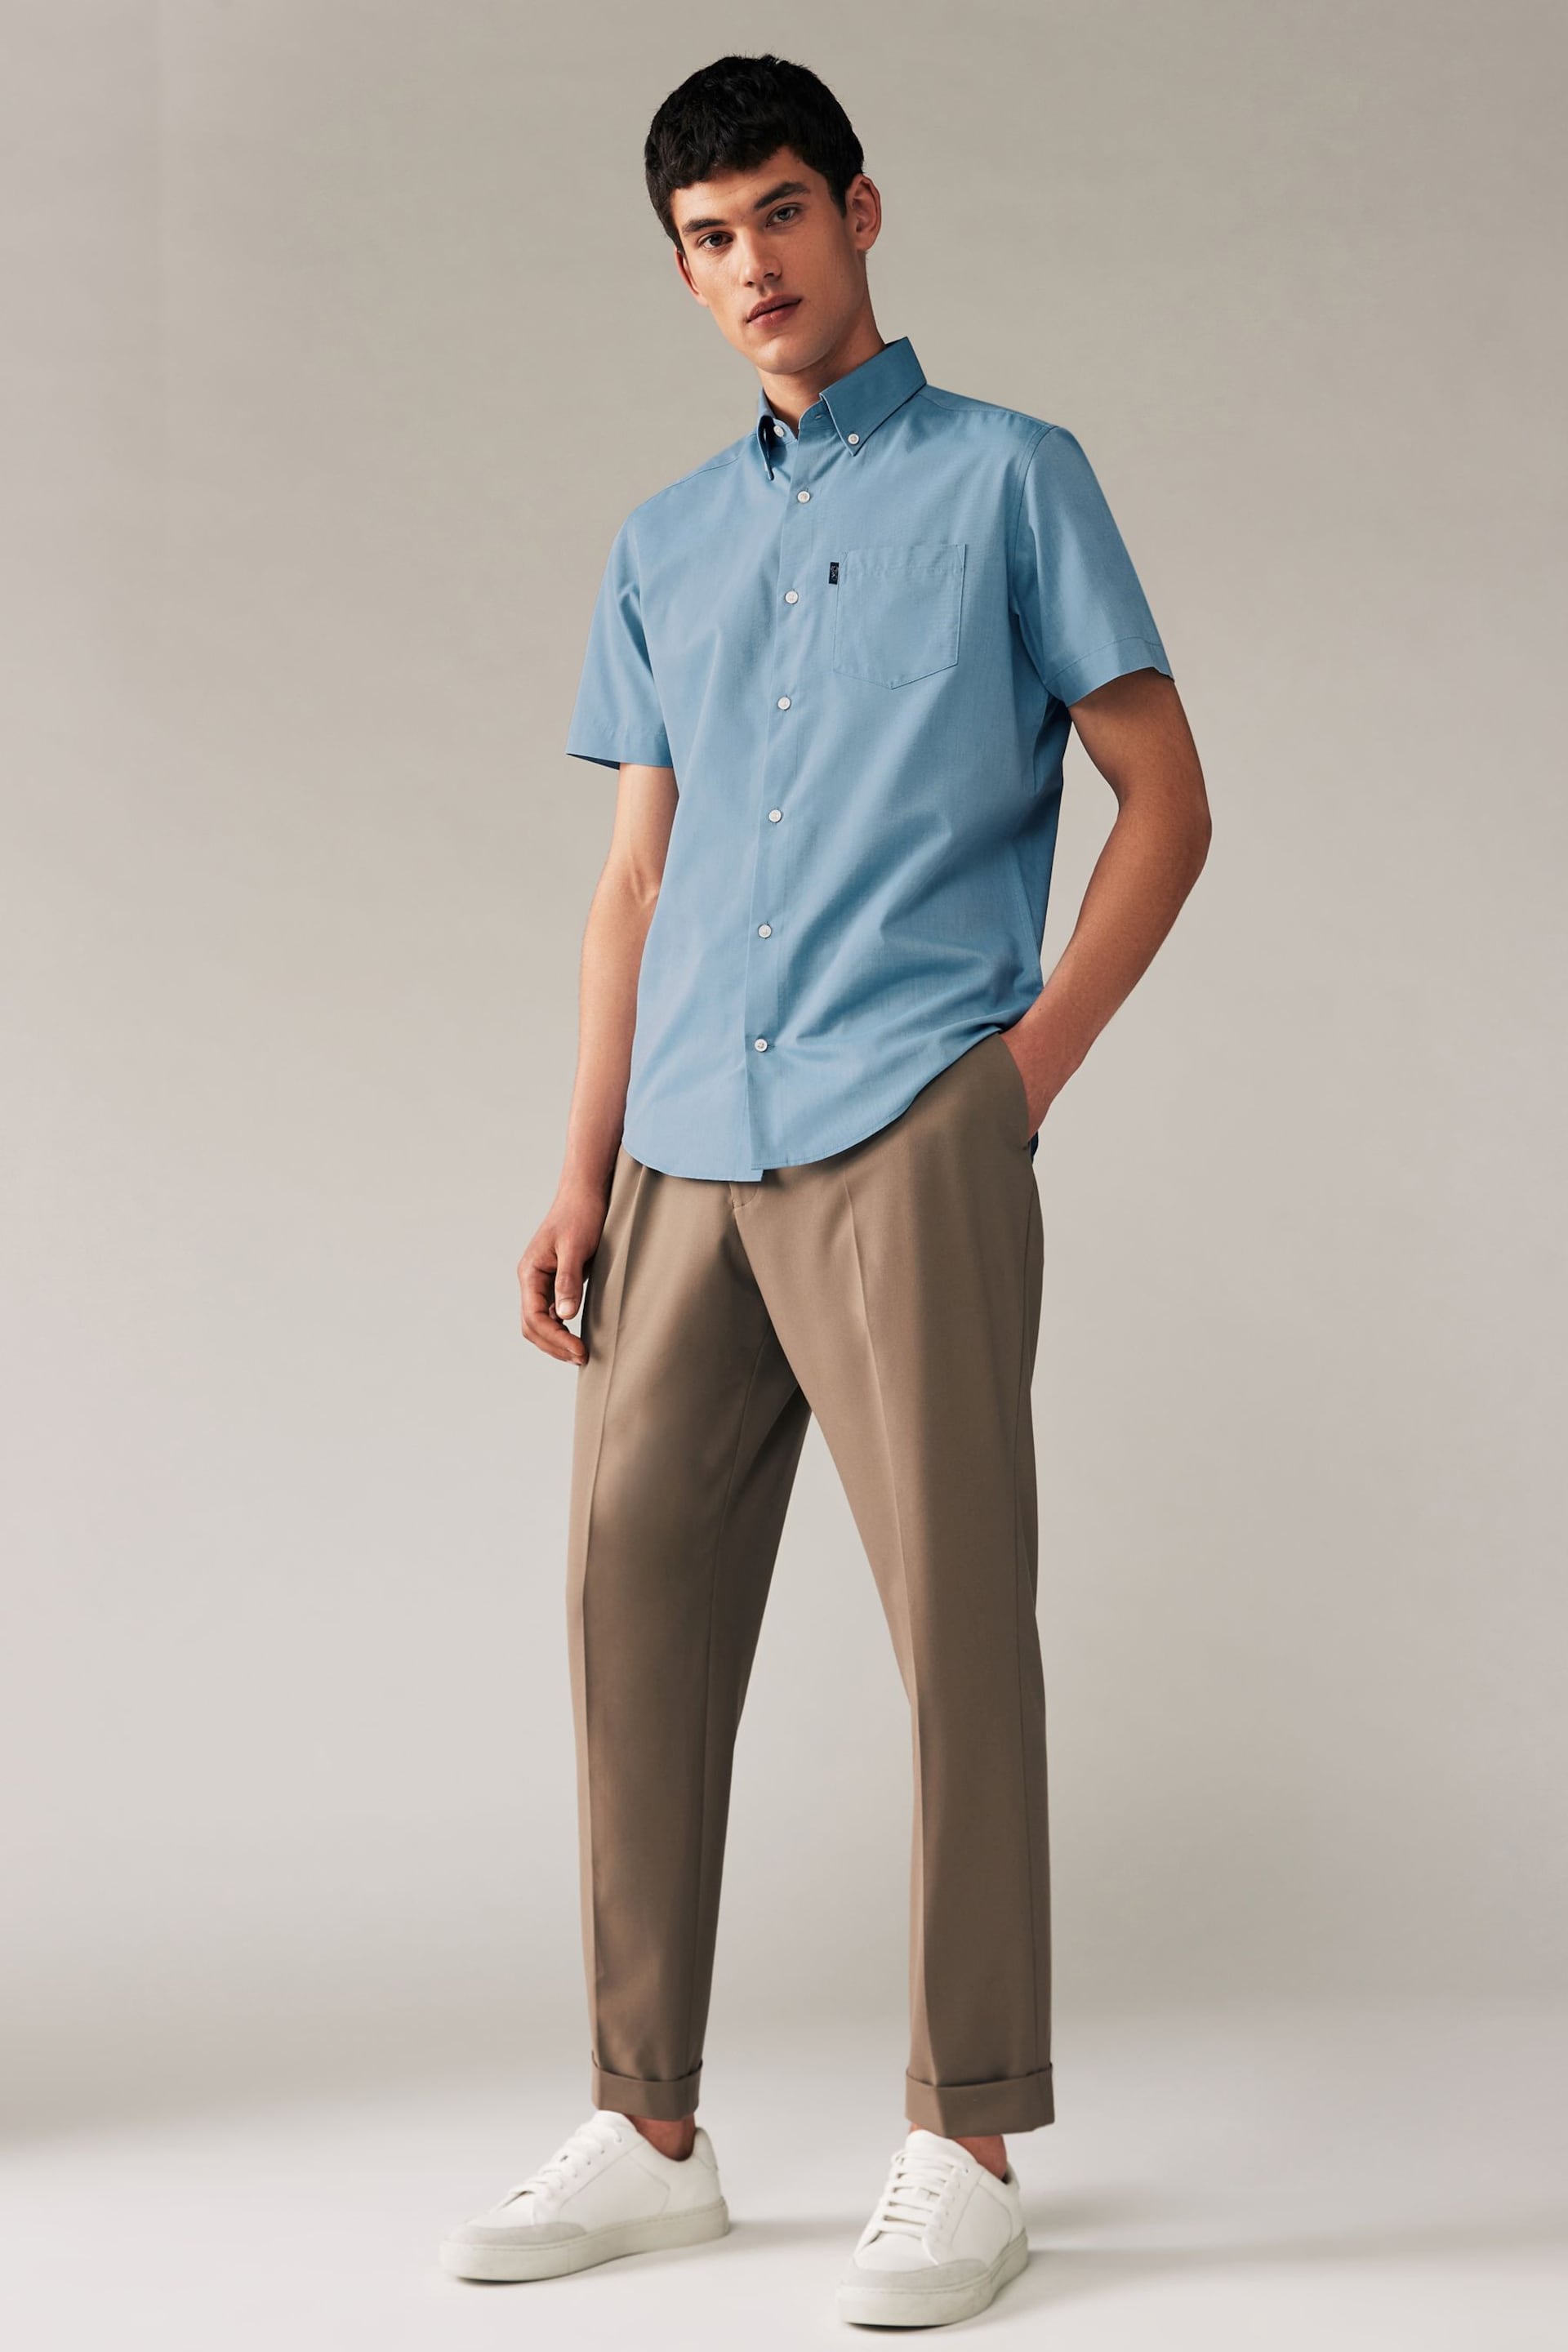 Dusky Blue Regular Fit Short Sleeve Easy Iron Button Down Oxford Shirt - Image 2 of 6